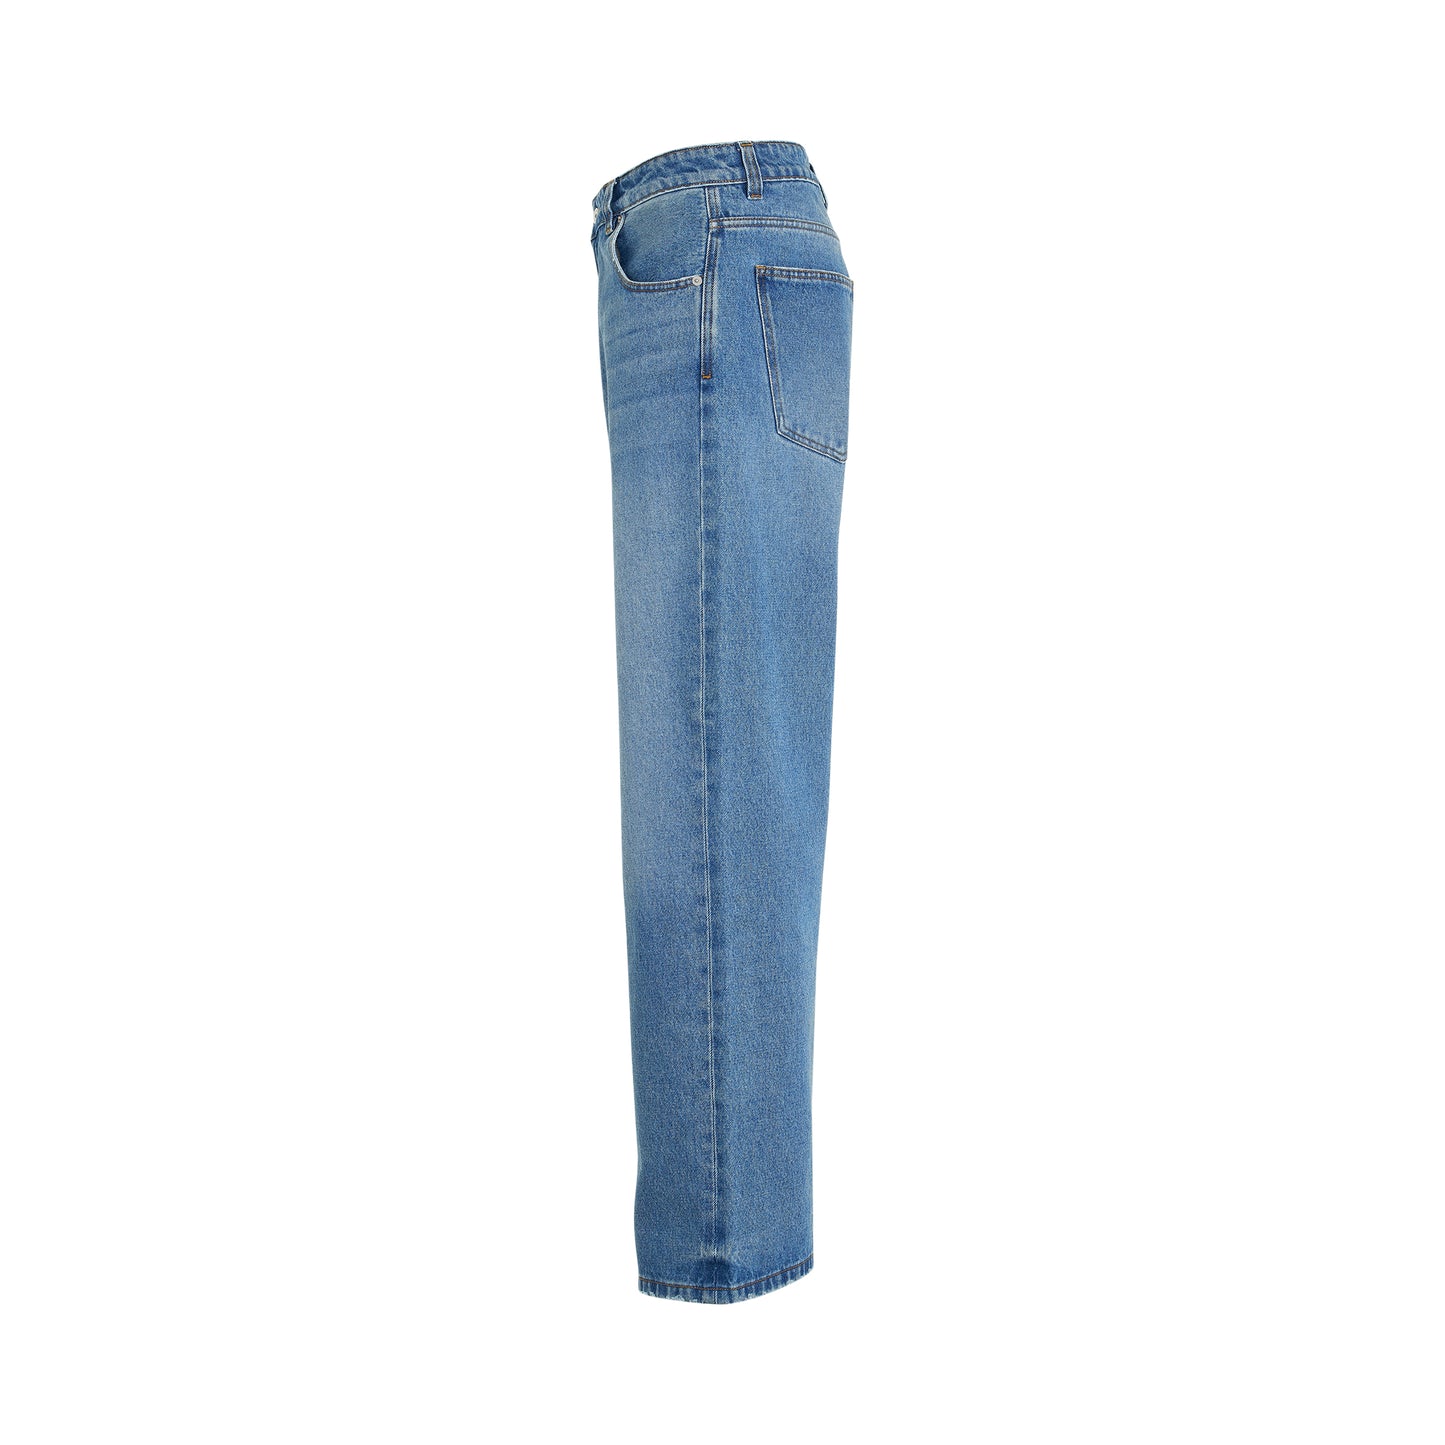 Le Denimes Large Jeans in Blue/Tabac